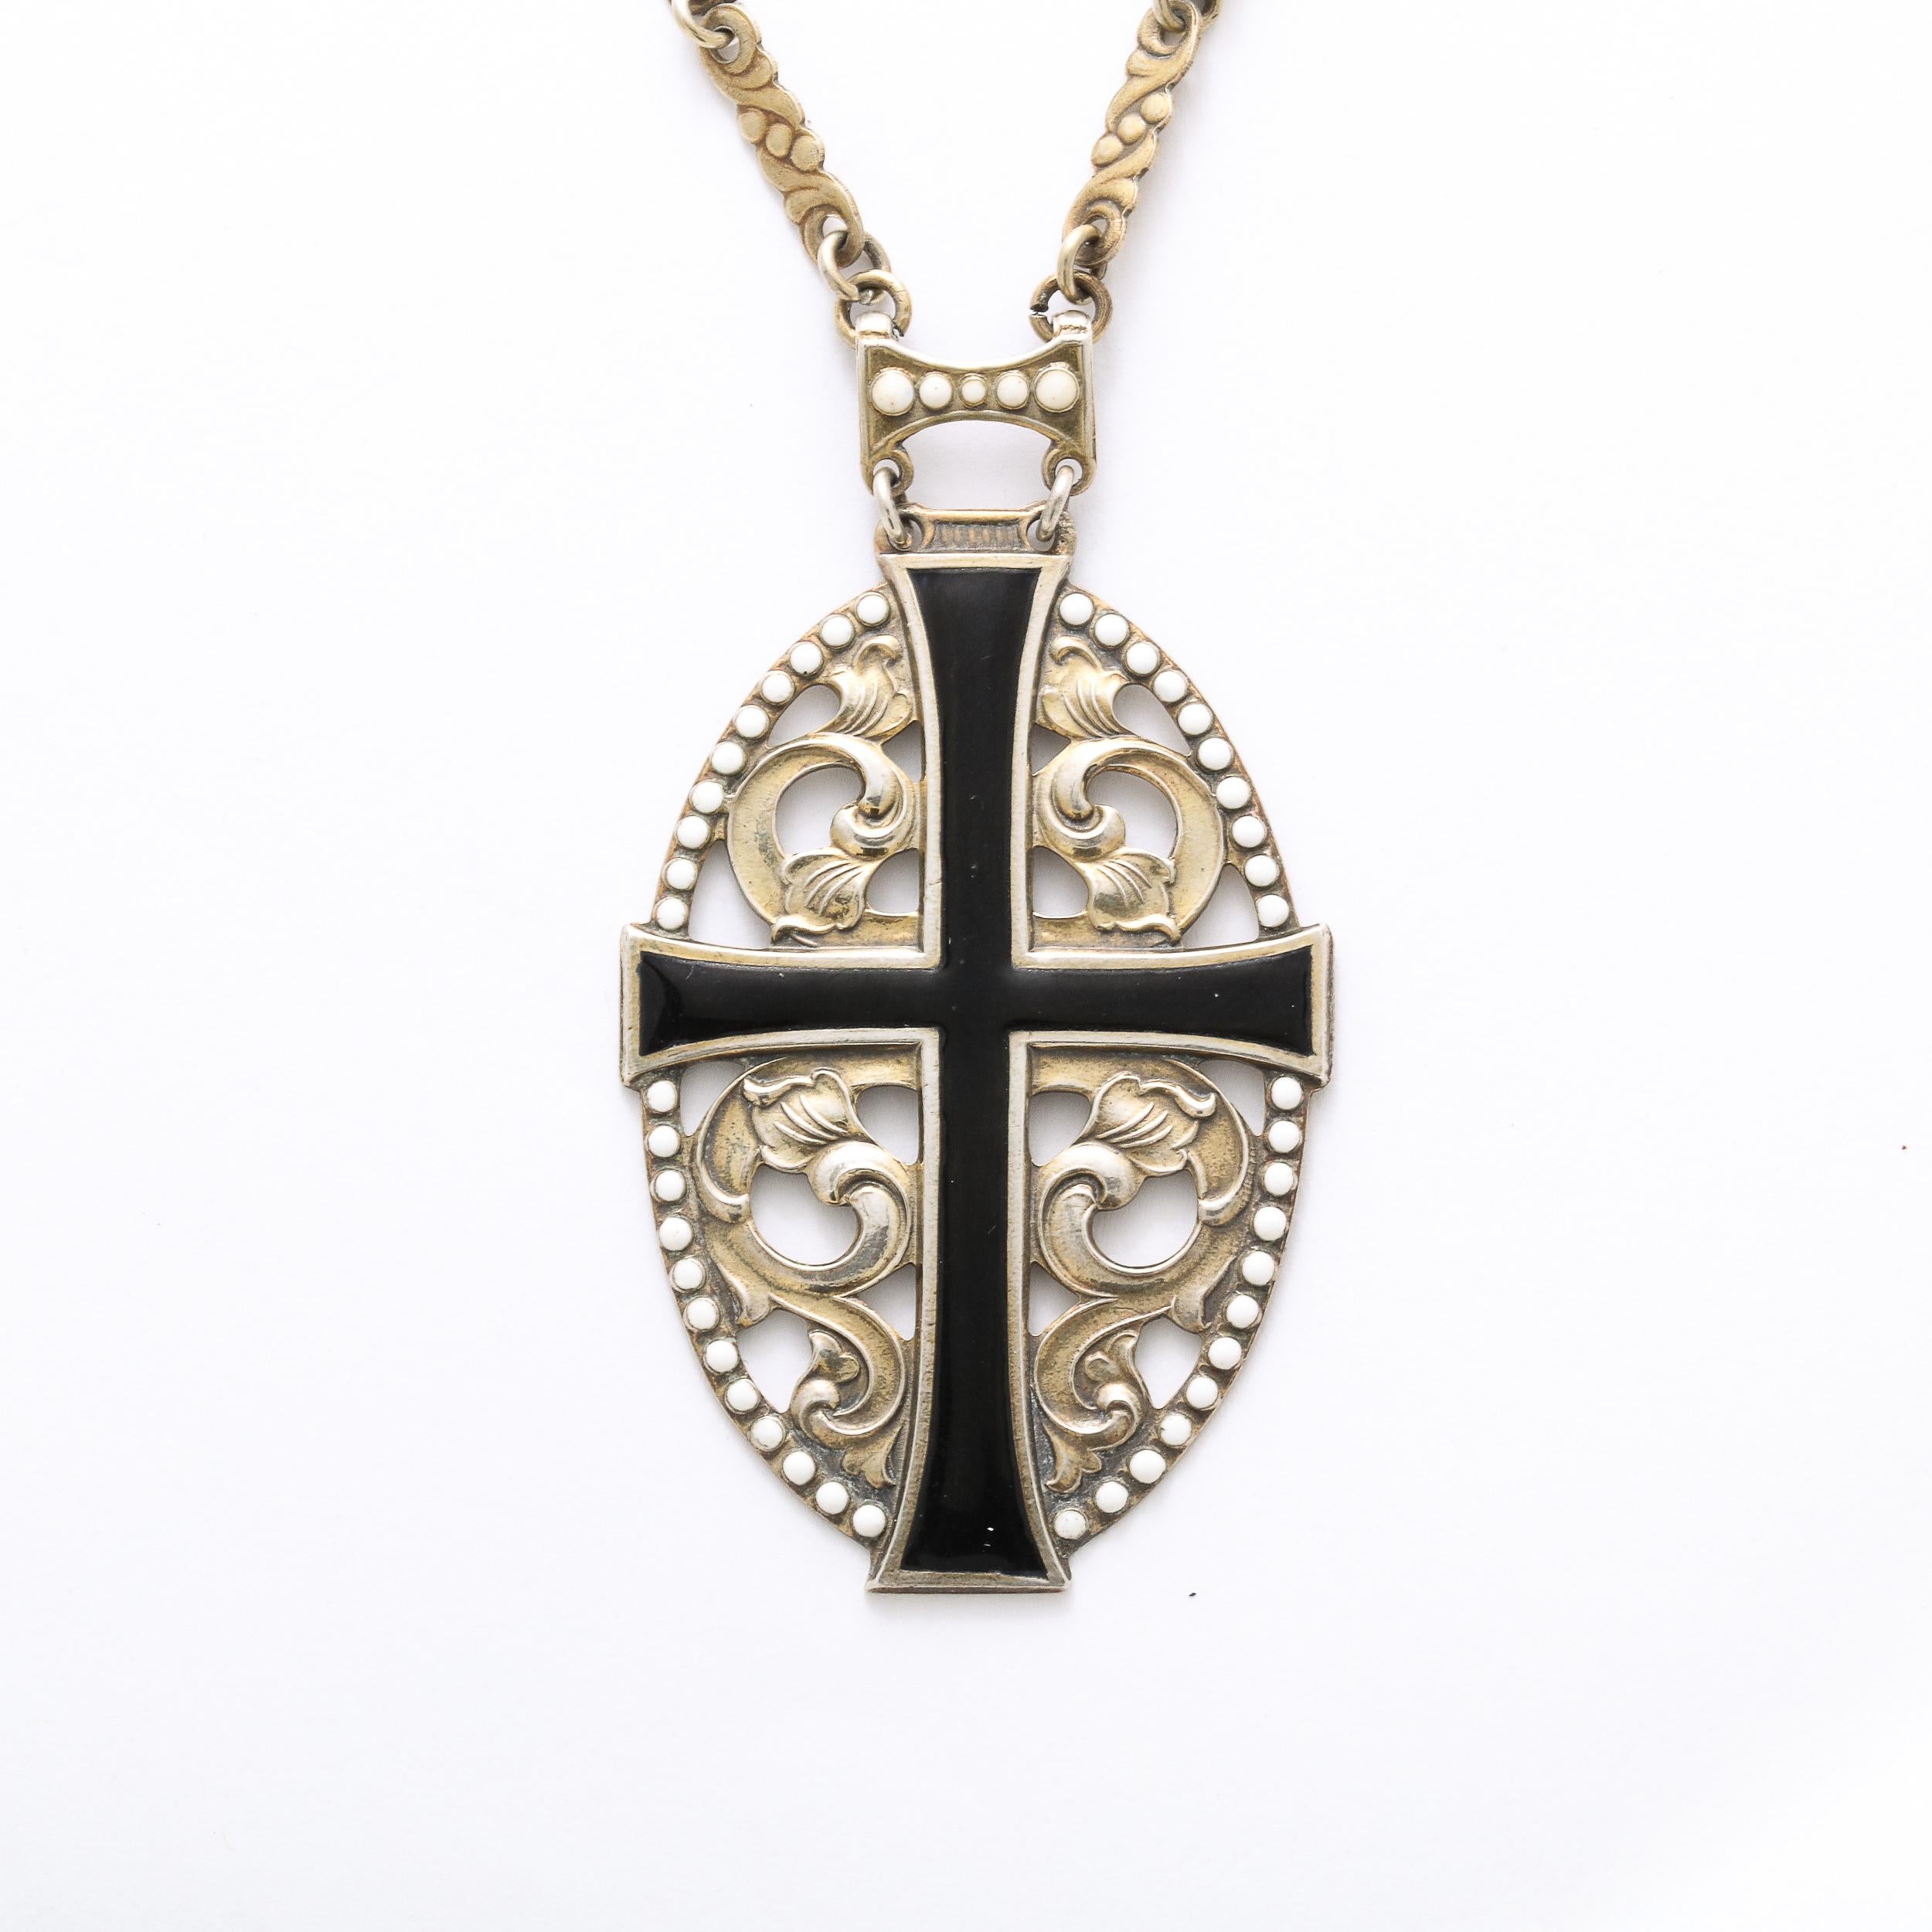 This exquisite Antique cross pendant features an open work stylized floral design decorated with black and white enamel suspended from the original link chain. This piece is signed IND .830 gilt silver. It in in excellent vintage condition .
Circa